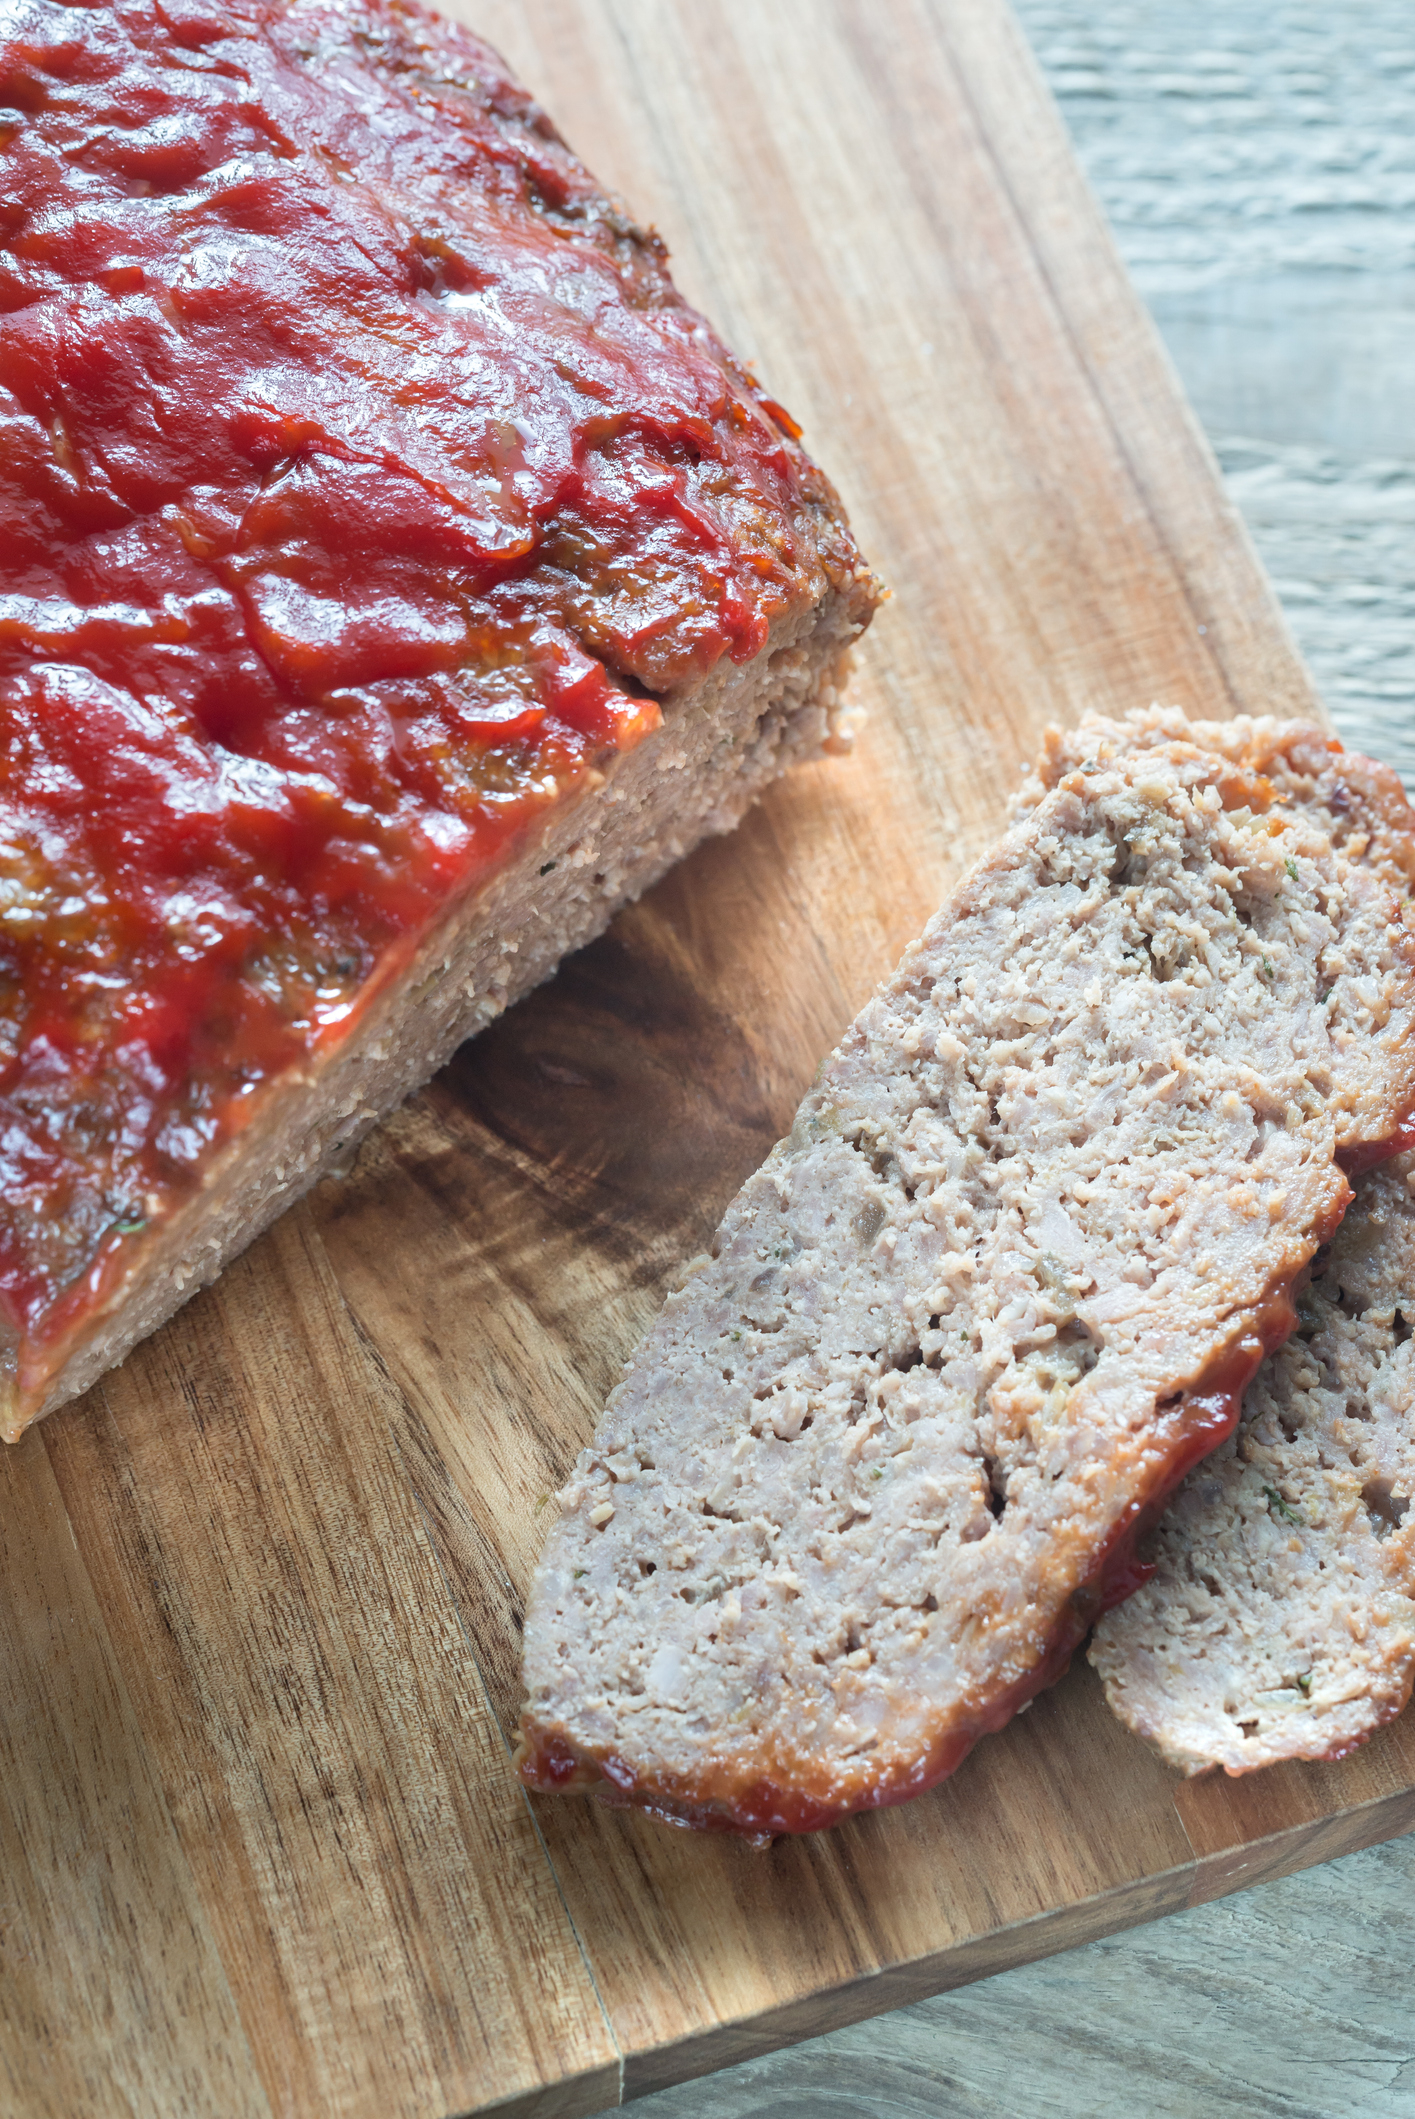 Sliced meatloaf on a wooden board with one piece cut